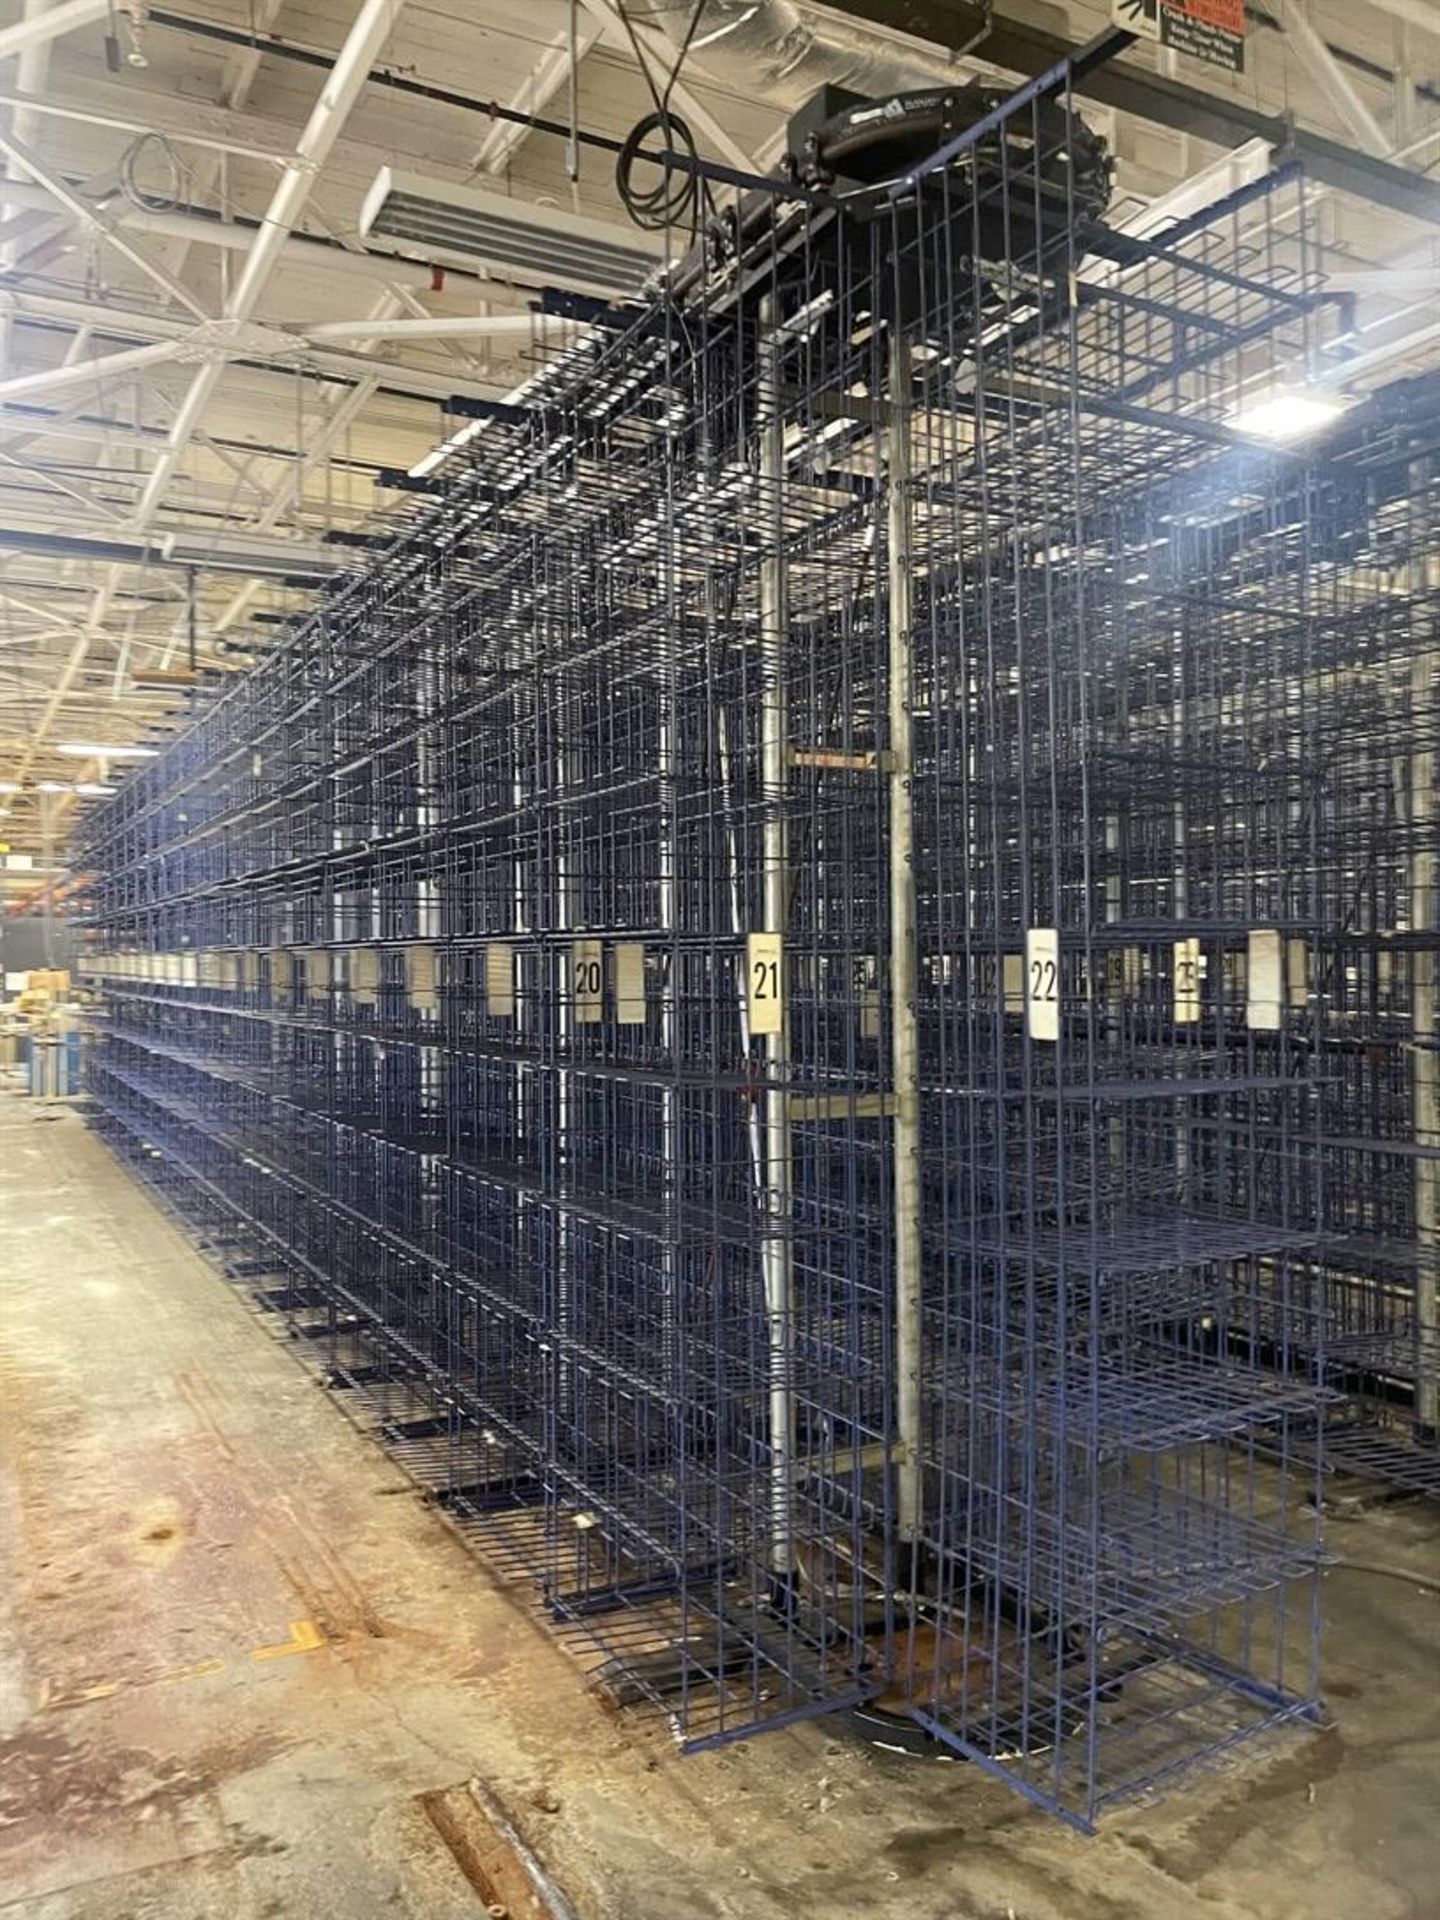 WHITE 5-Carousel Inventory Storage System, 42 Sections of 10 Baskets Each, 420 Baskets Per Carousel, - Image 2 of 6